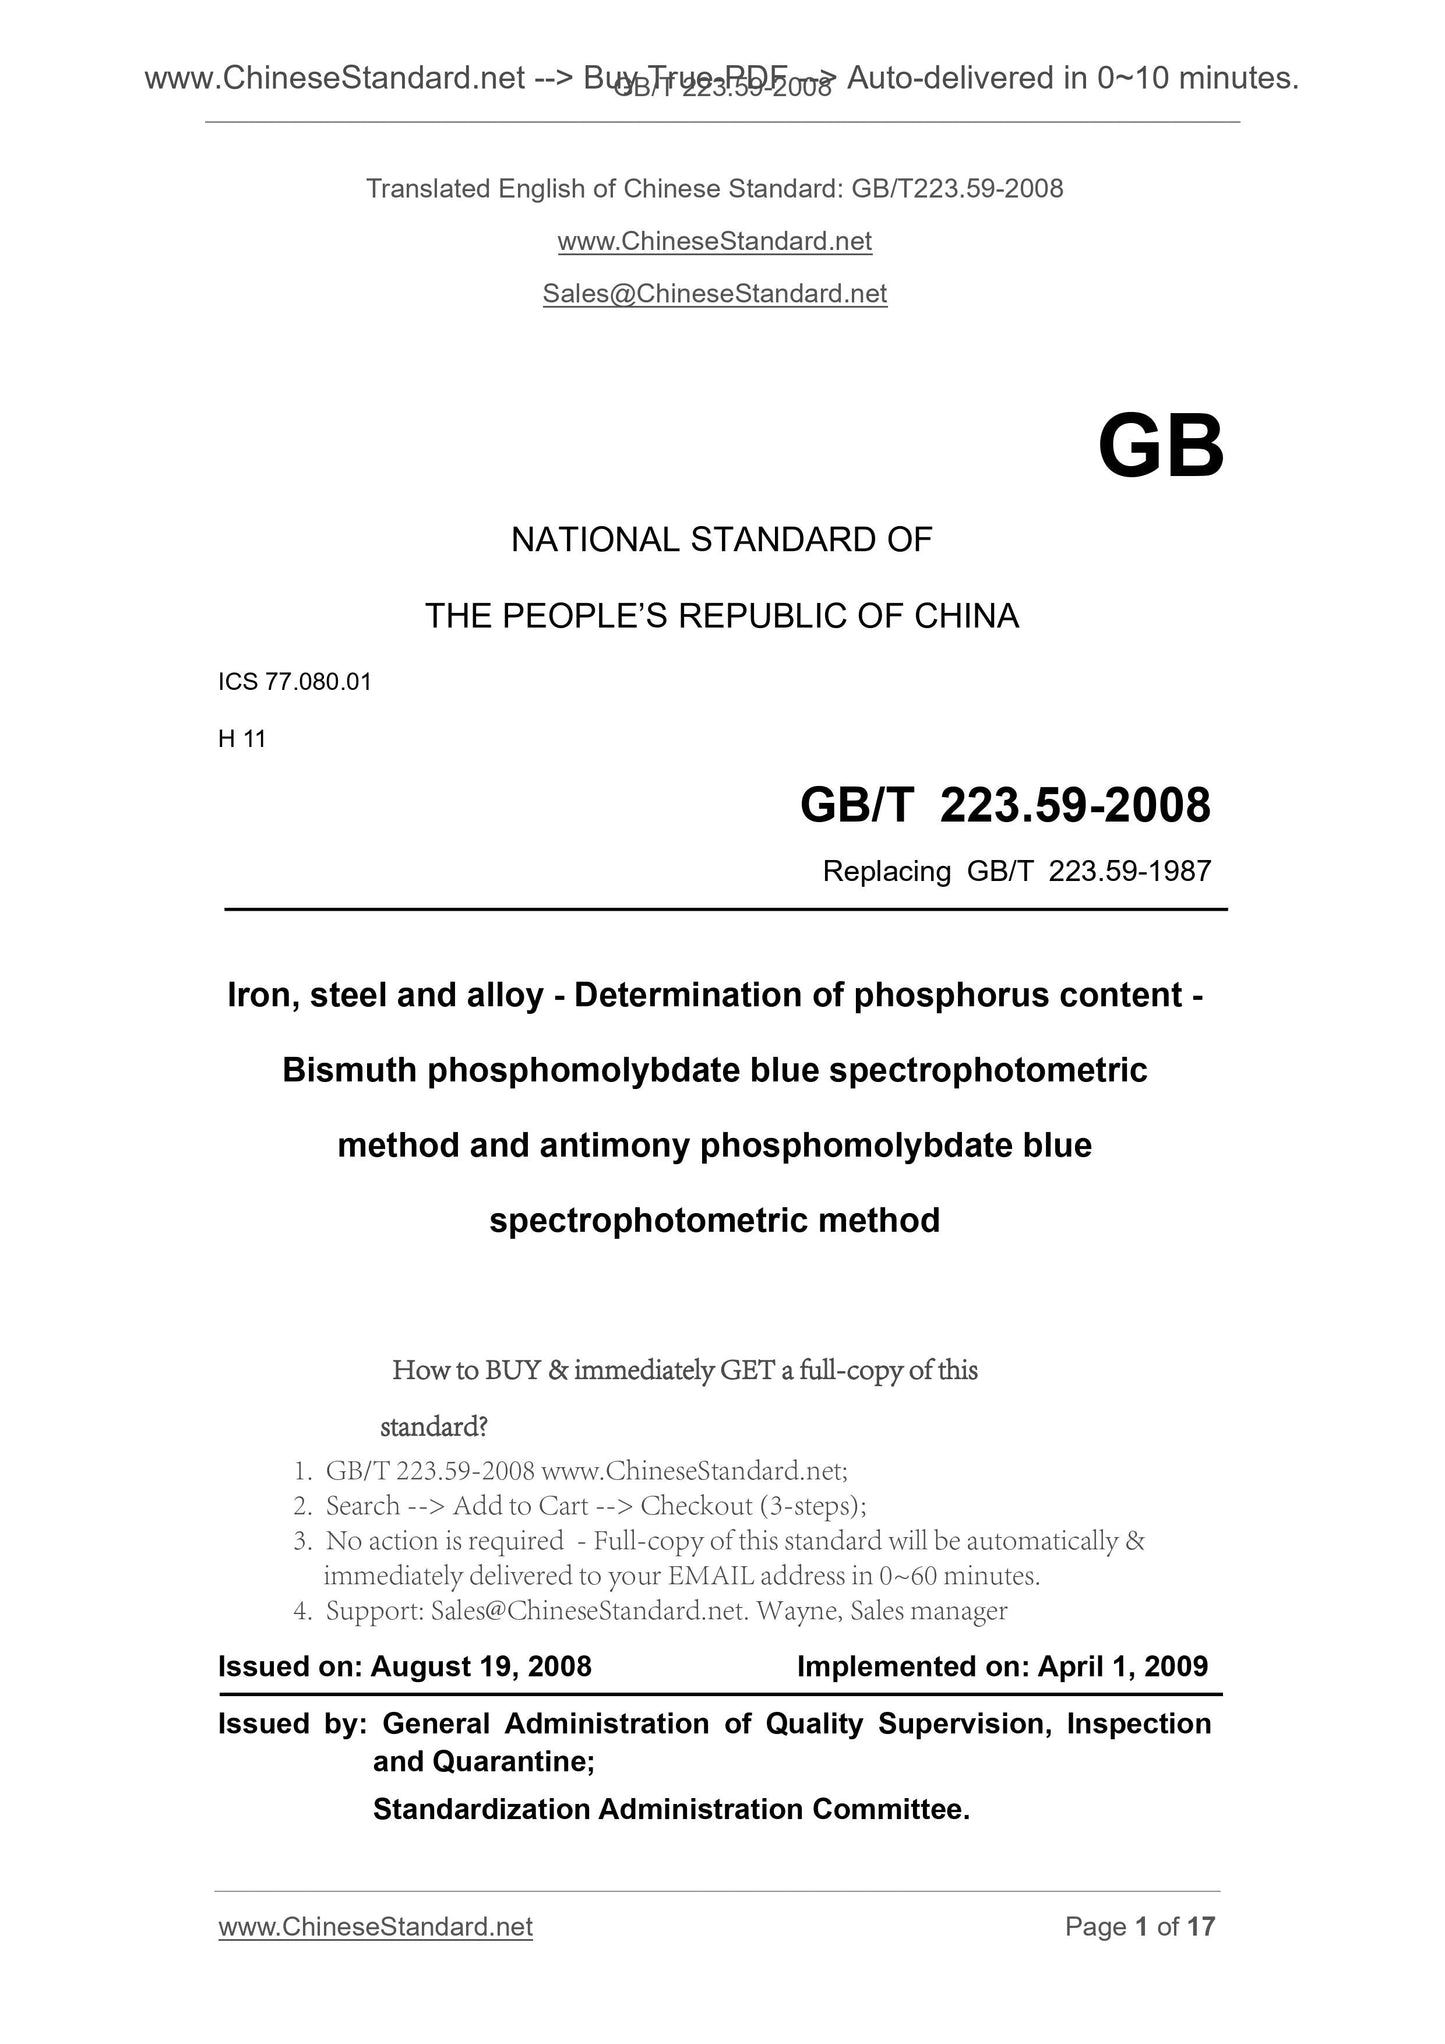 GB/T 223.59-2008 Page 1